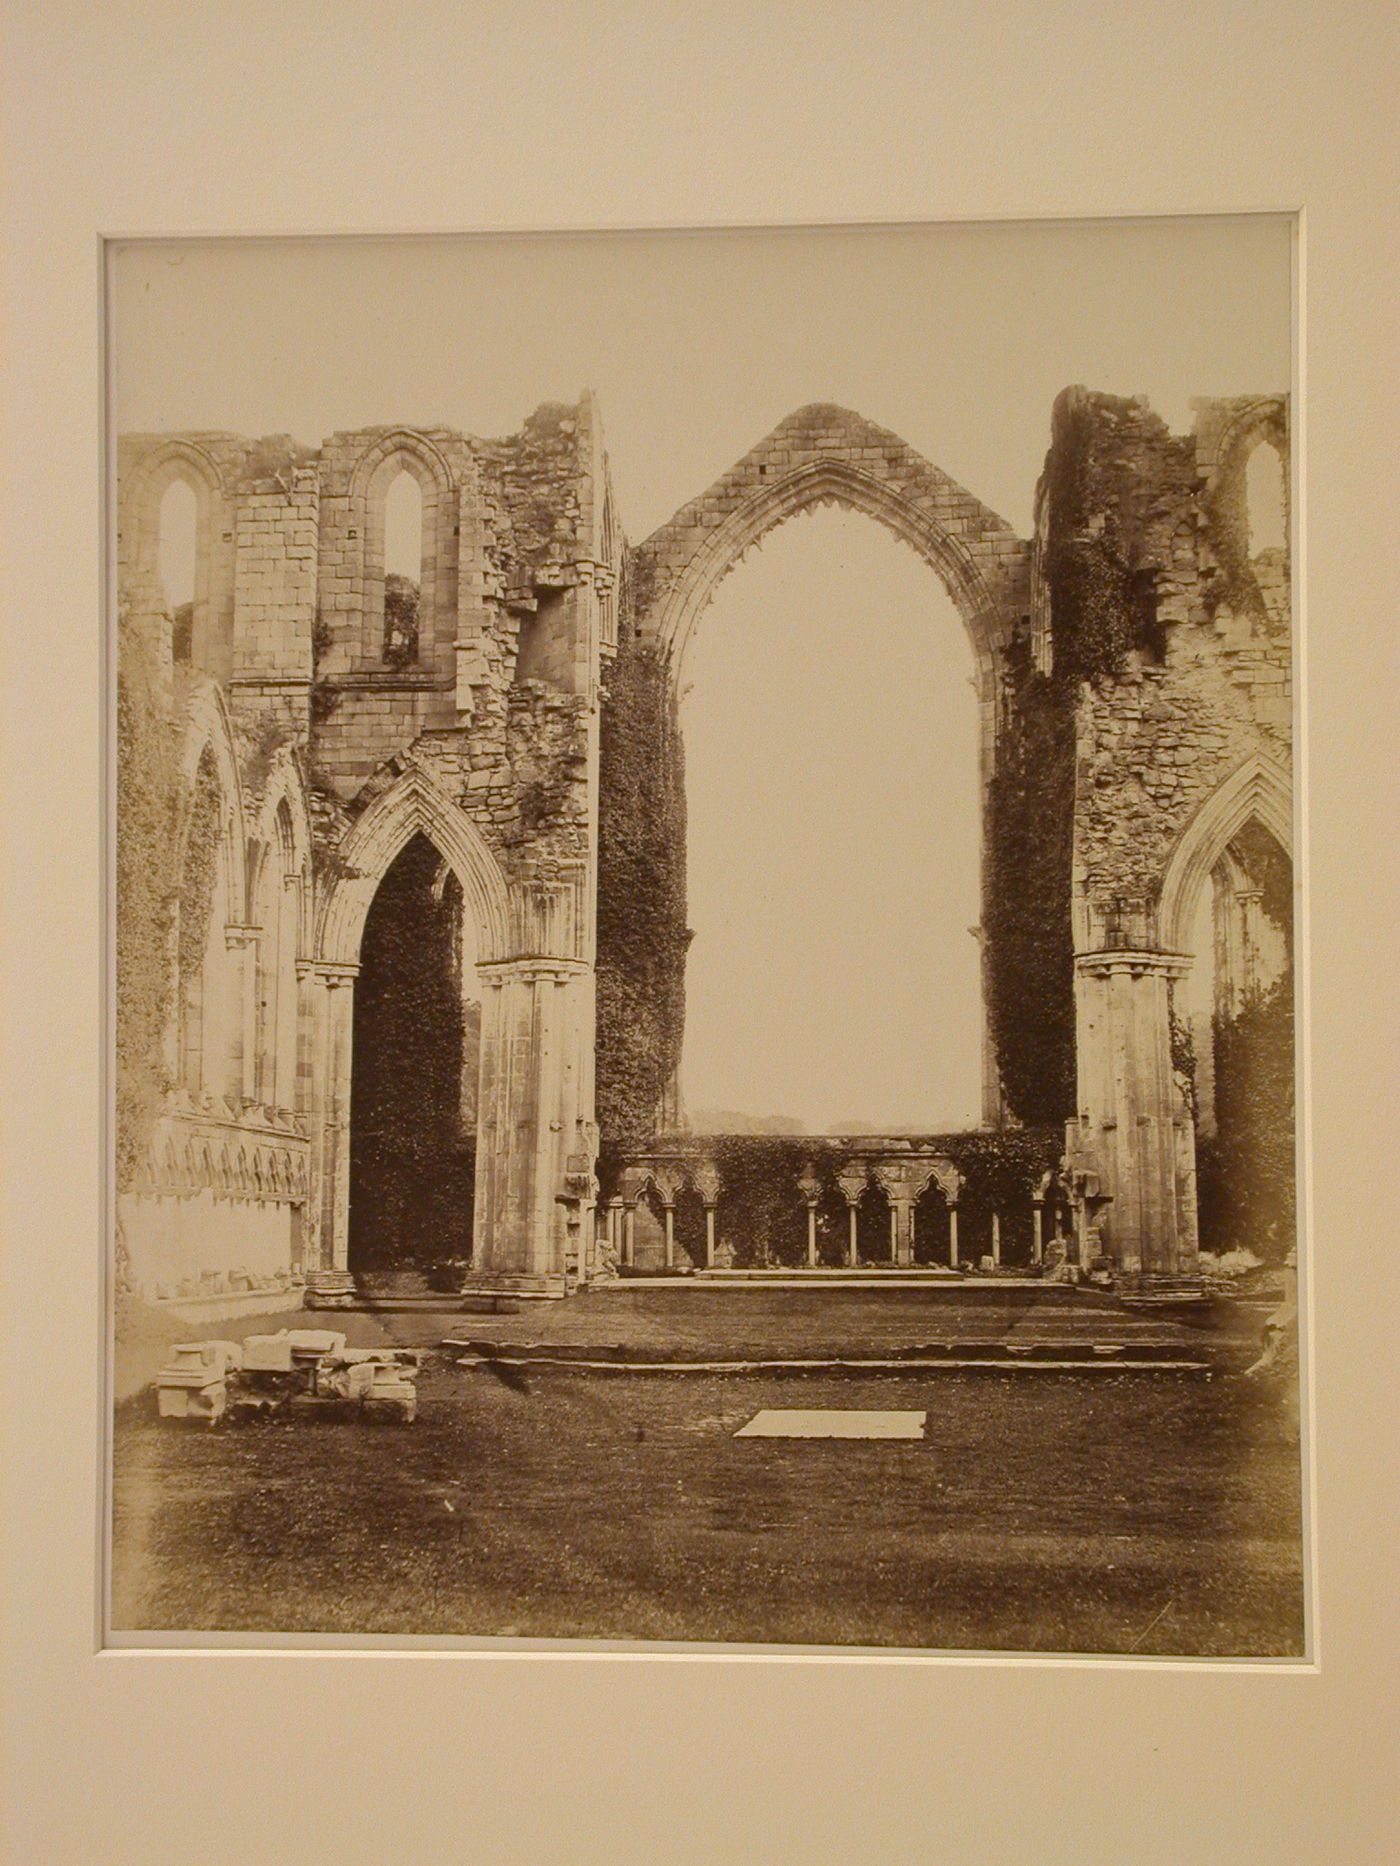 View of the ruined nave, Fountain Abbey, Yorkshire, England